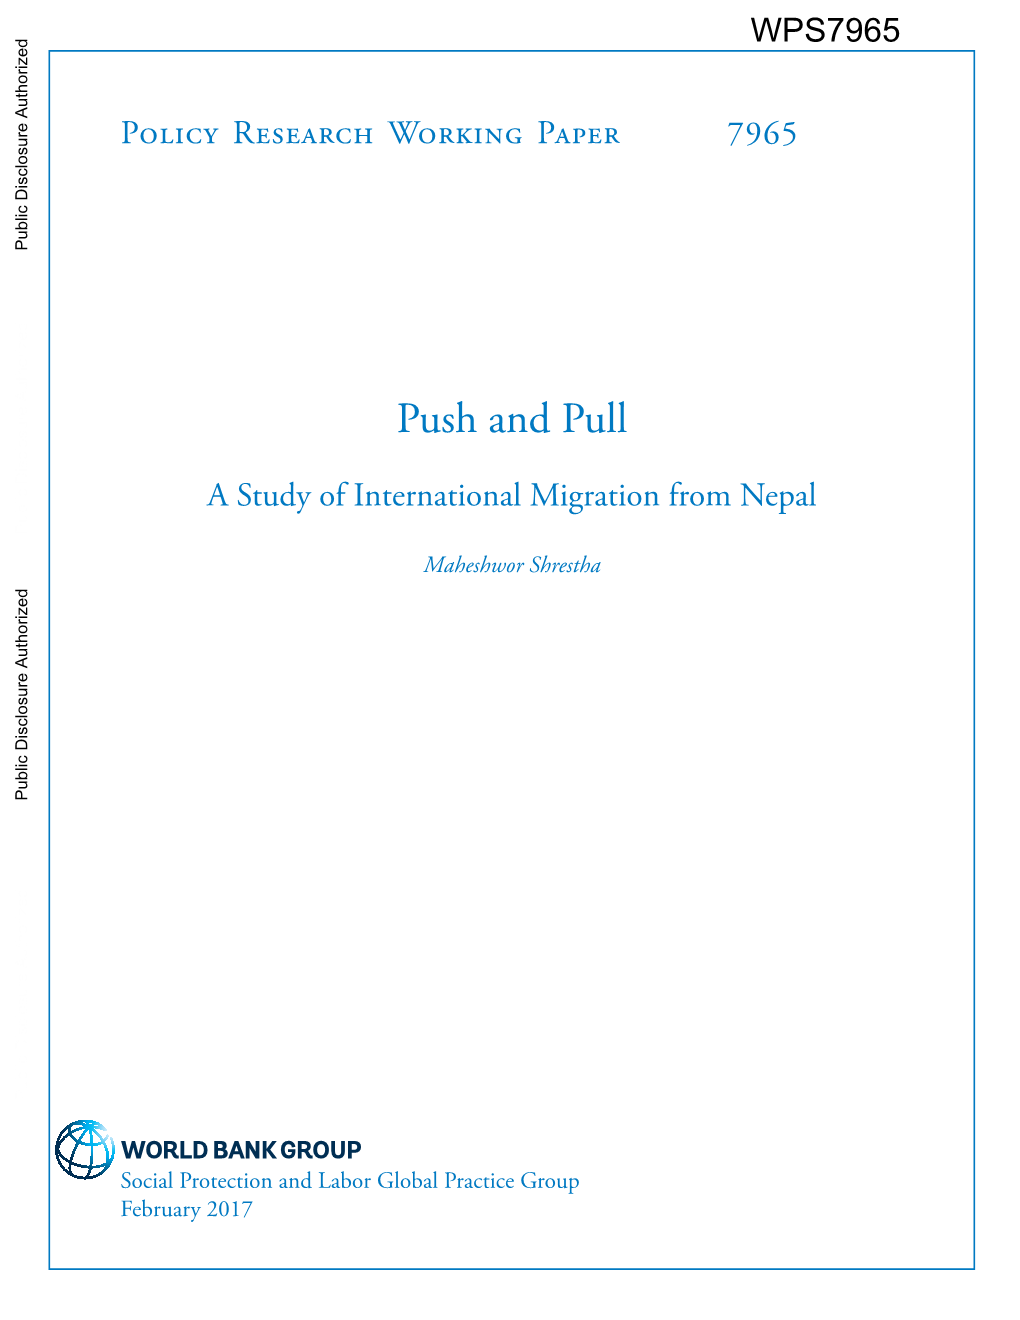 Push and Pull: a Study of International Migration from Nepal